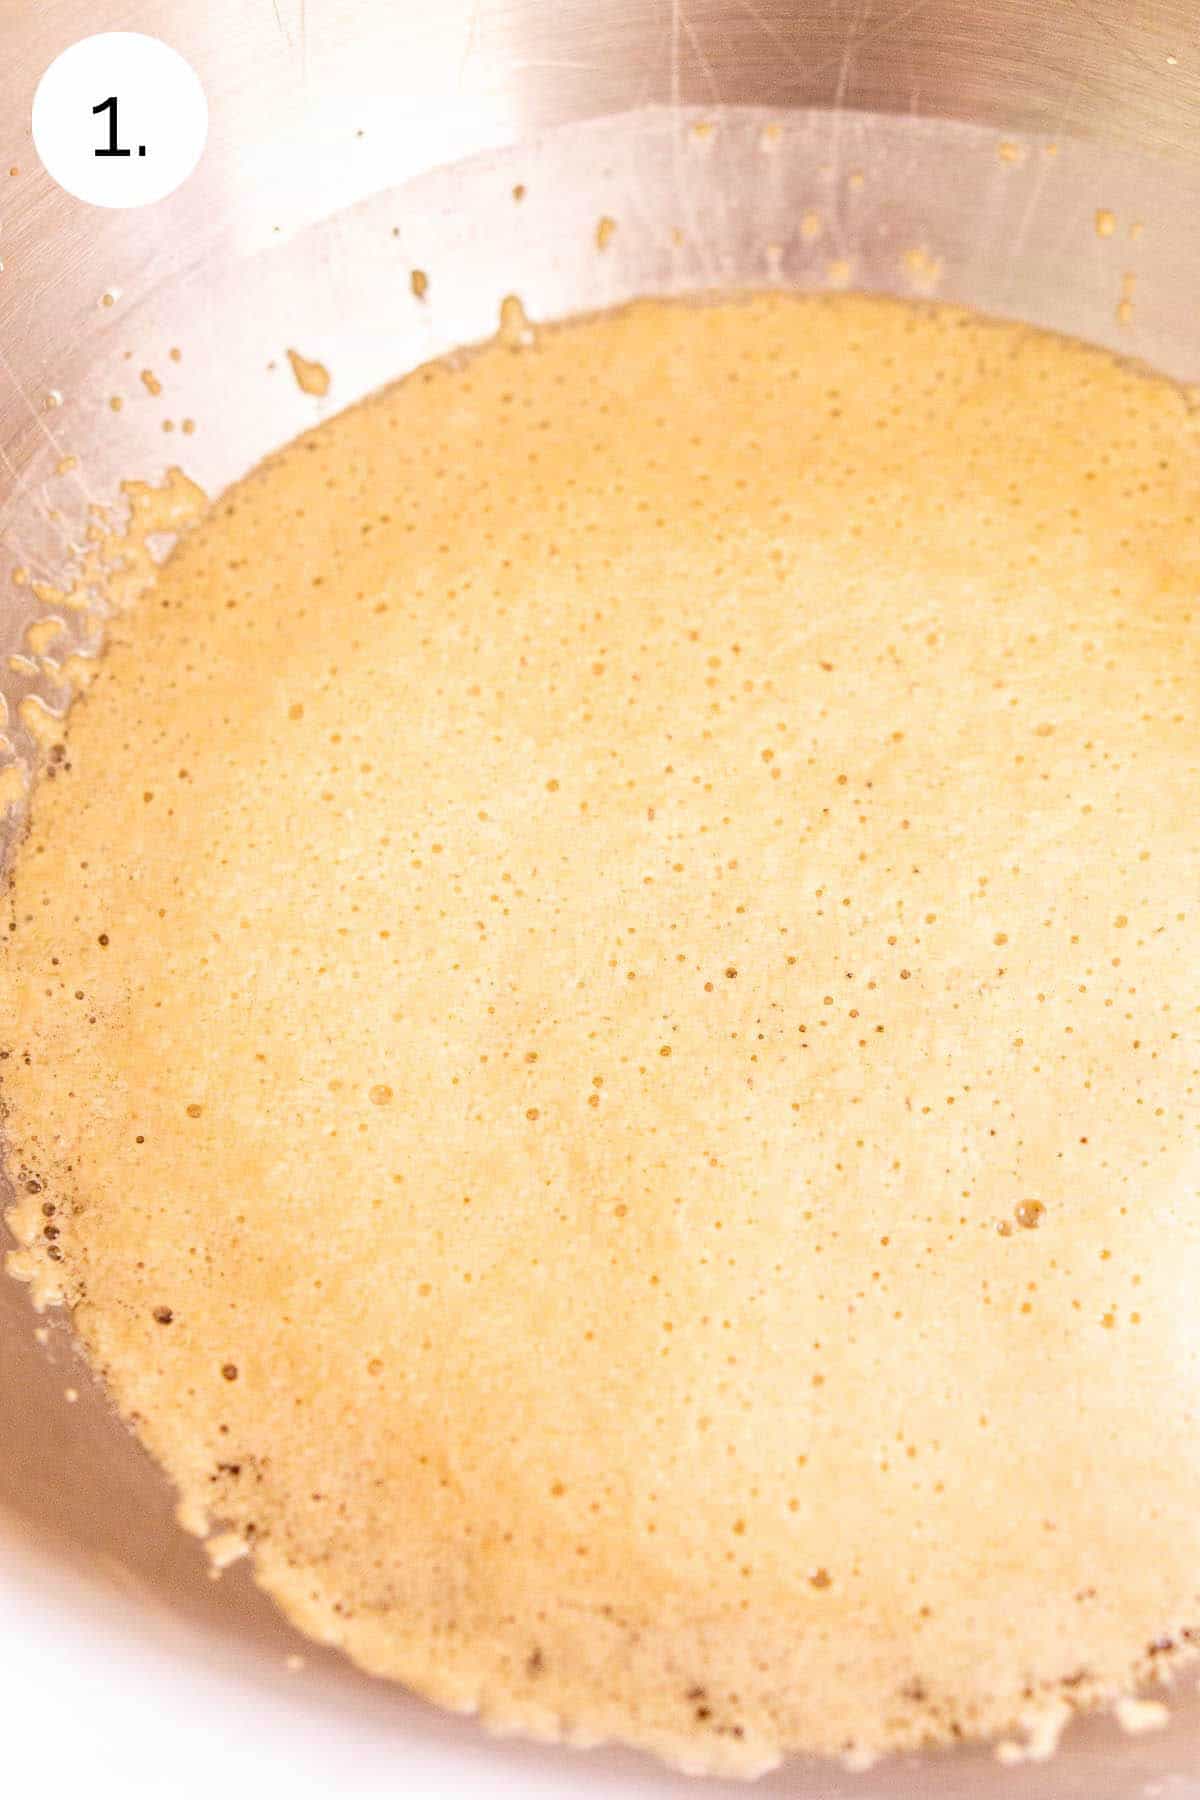 The yeast mixture in a stainless steel mixing bowl after it has turned foamy.